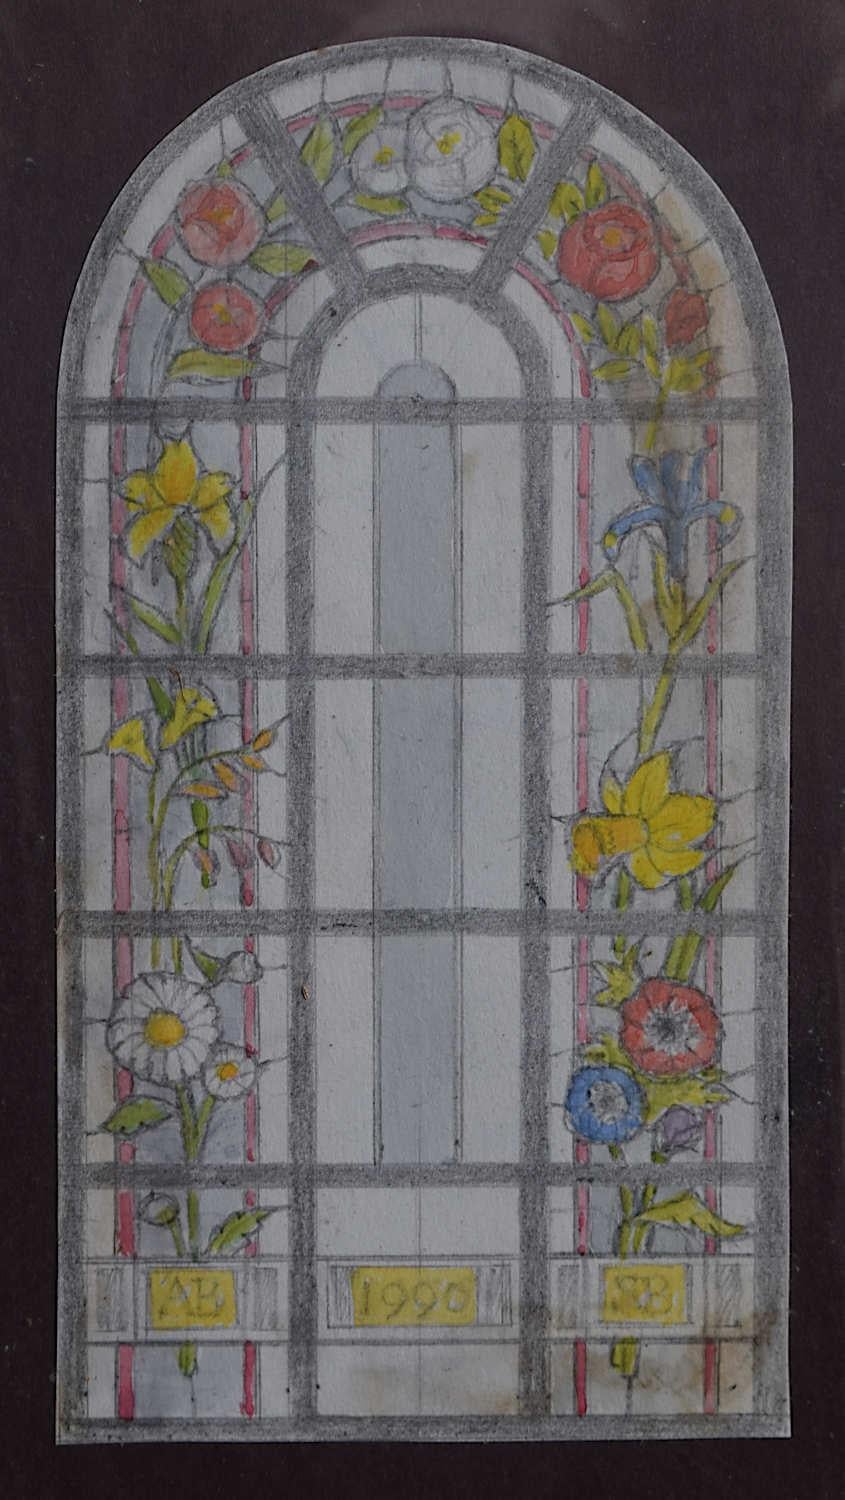 We acquired a series of watercolour stained glass designs from Jane Gray's studio. To find more scroll down to "More from this Seller" and below it click on "See all from this seller." 

Jane Gray (b.1931)
Stained Glass Design
Watercolour
14.5 x 7.5